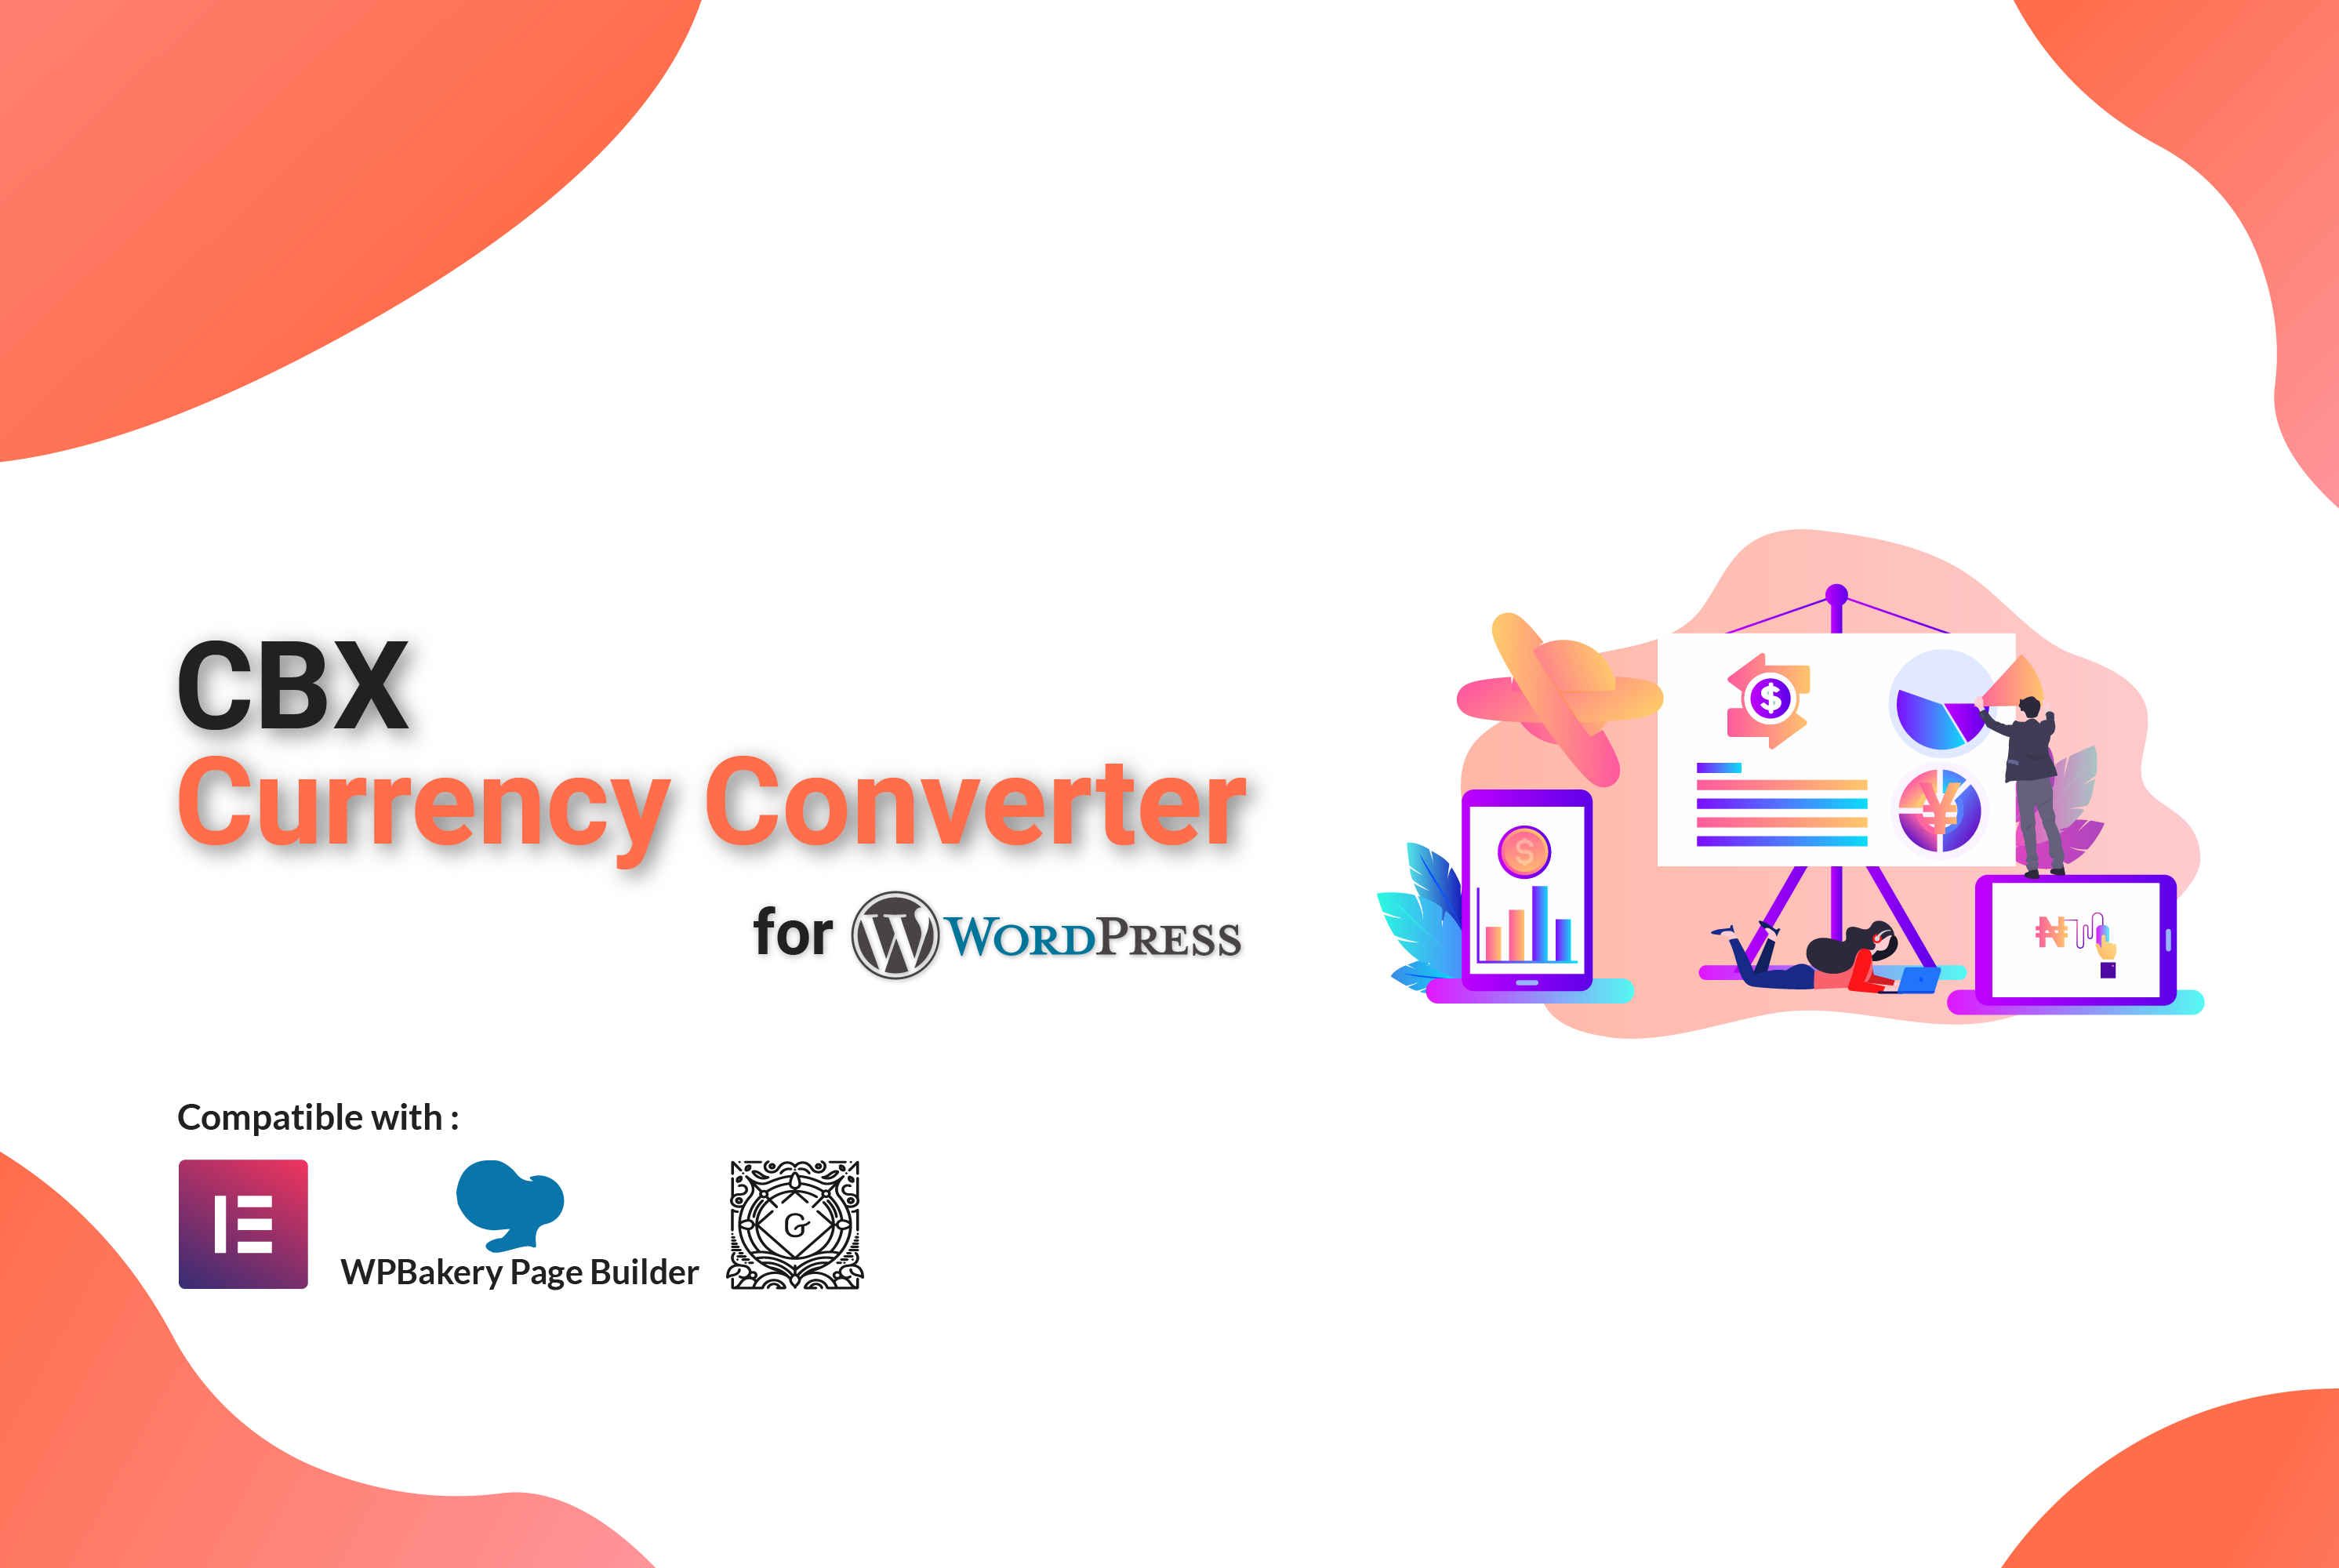 CBX Currency Converter for WordPress